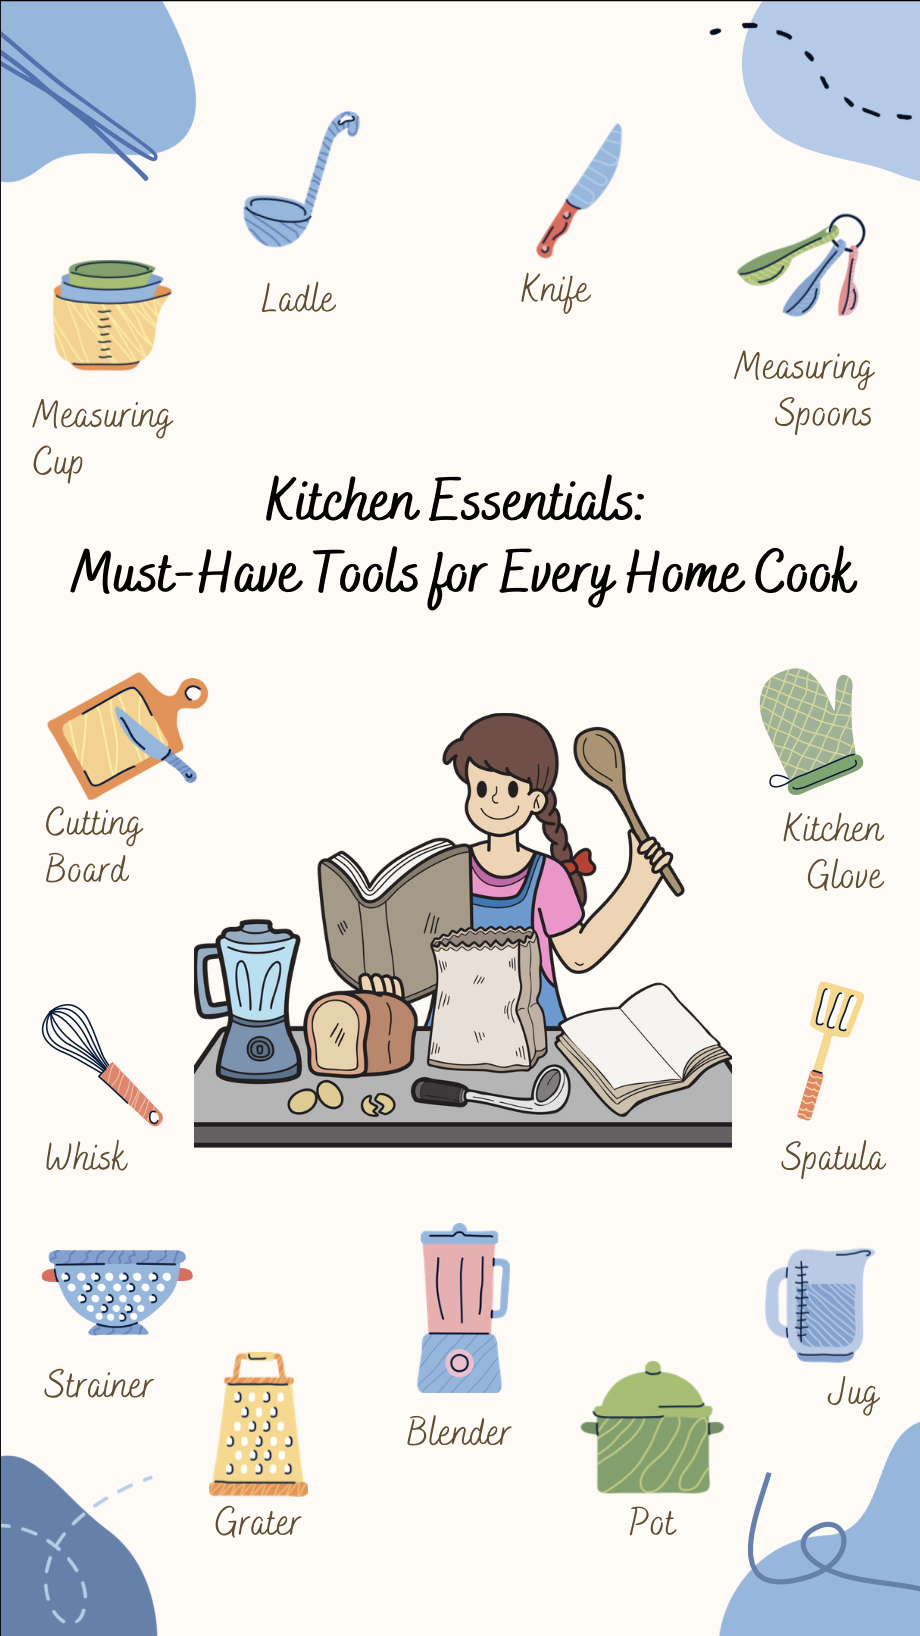 Must Have Kitchen Essentials for Your Home